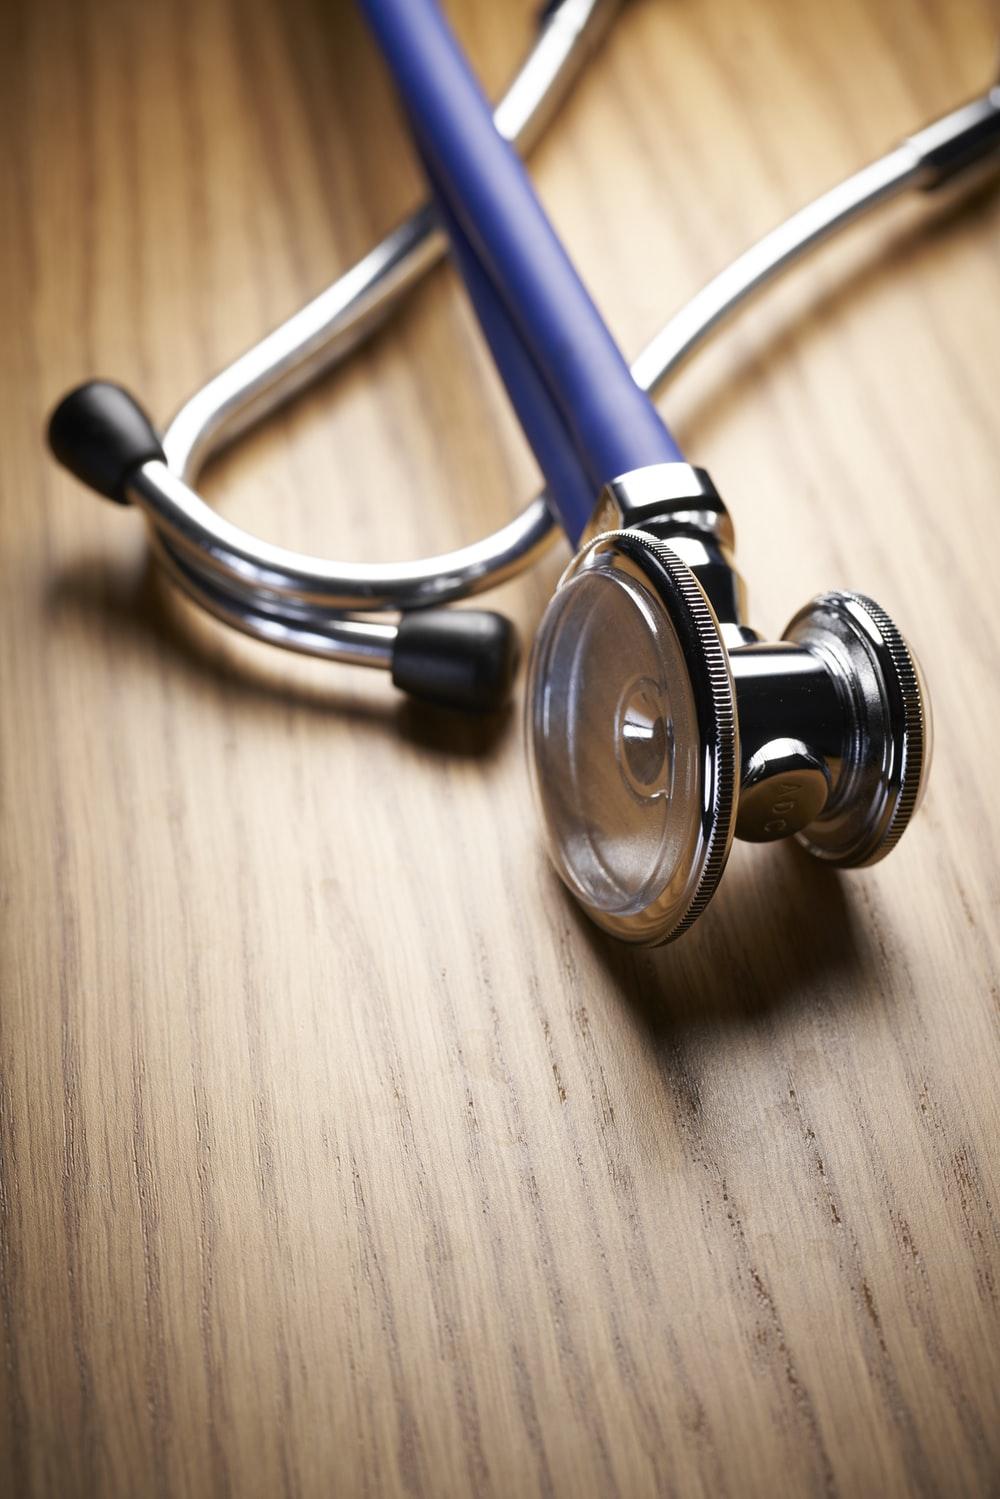 Stethoscope Picture. Download Free Image